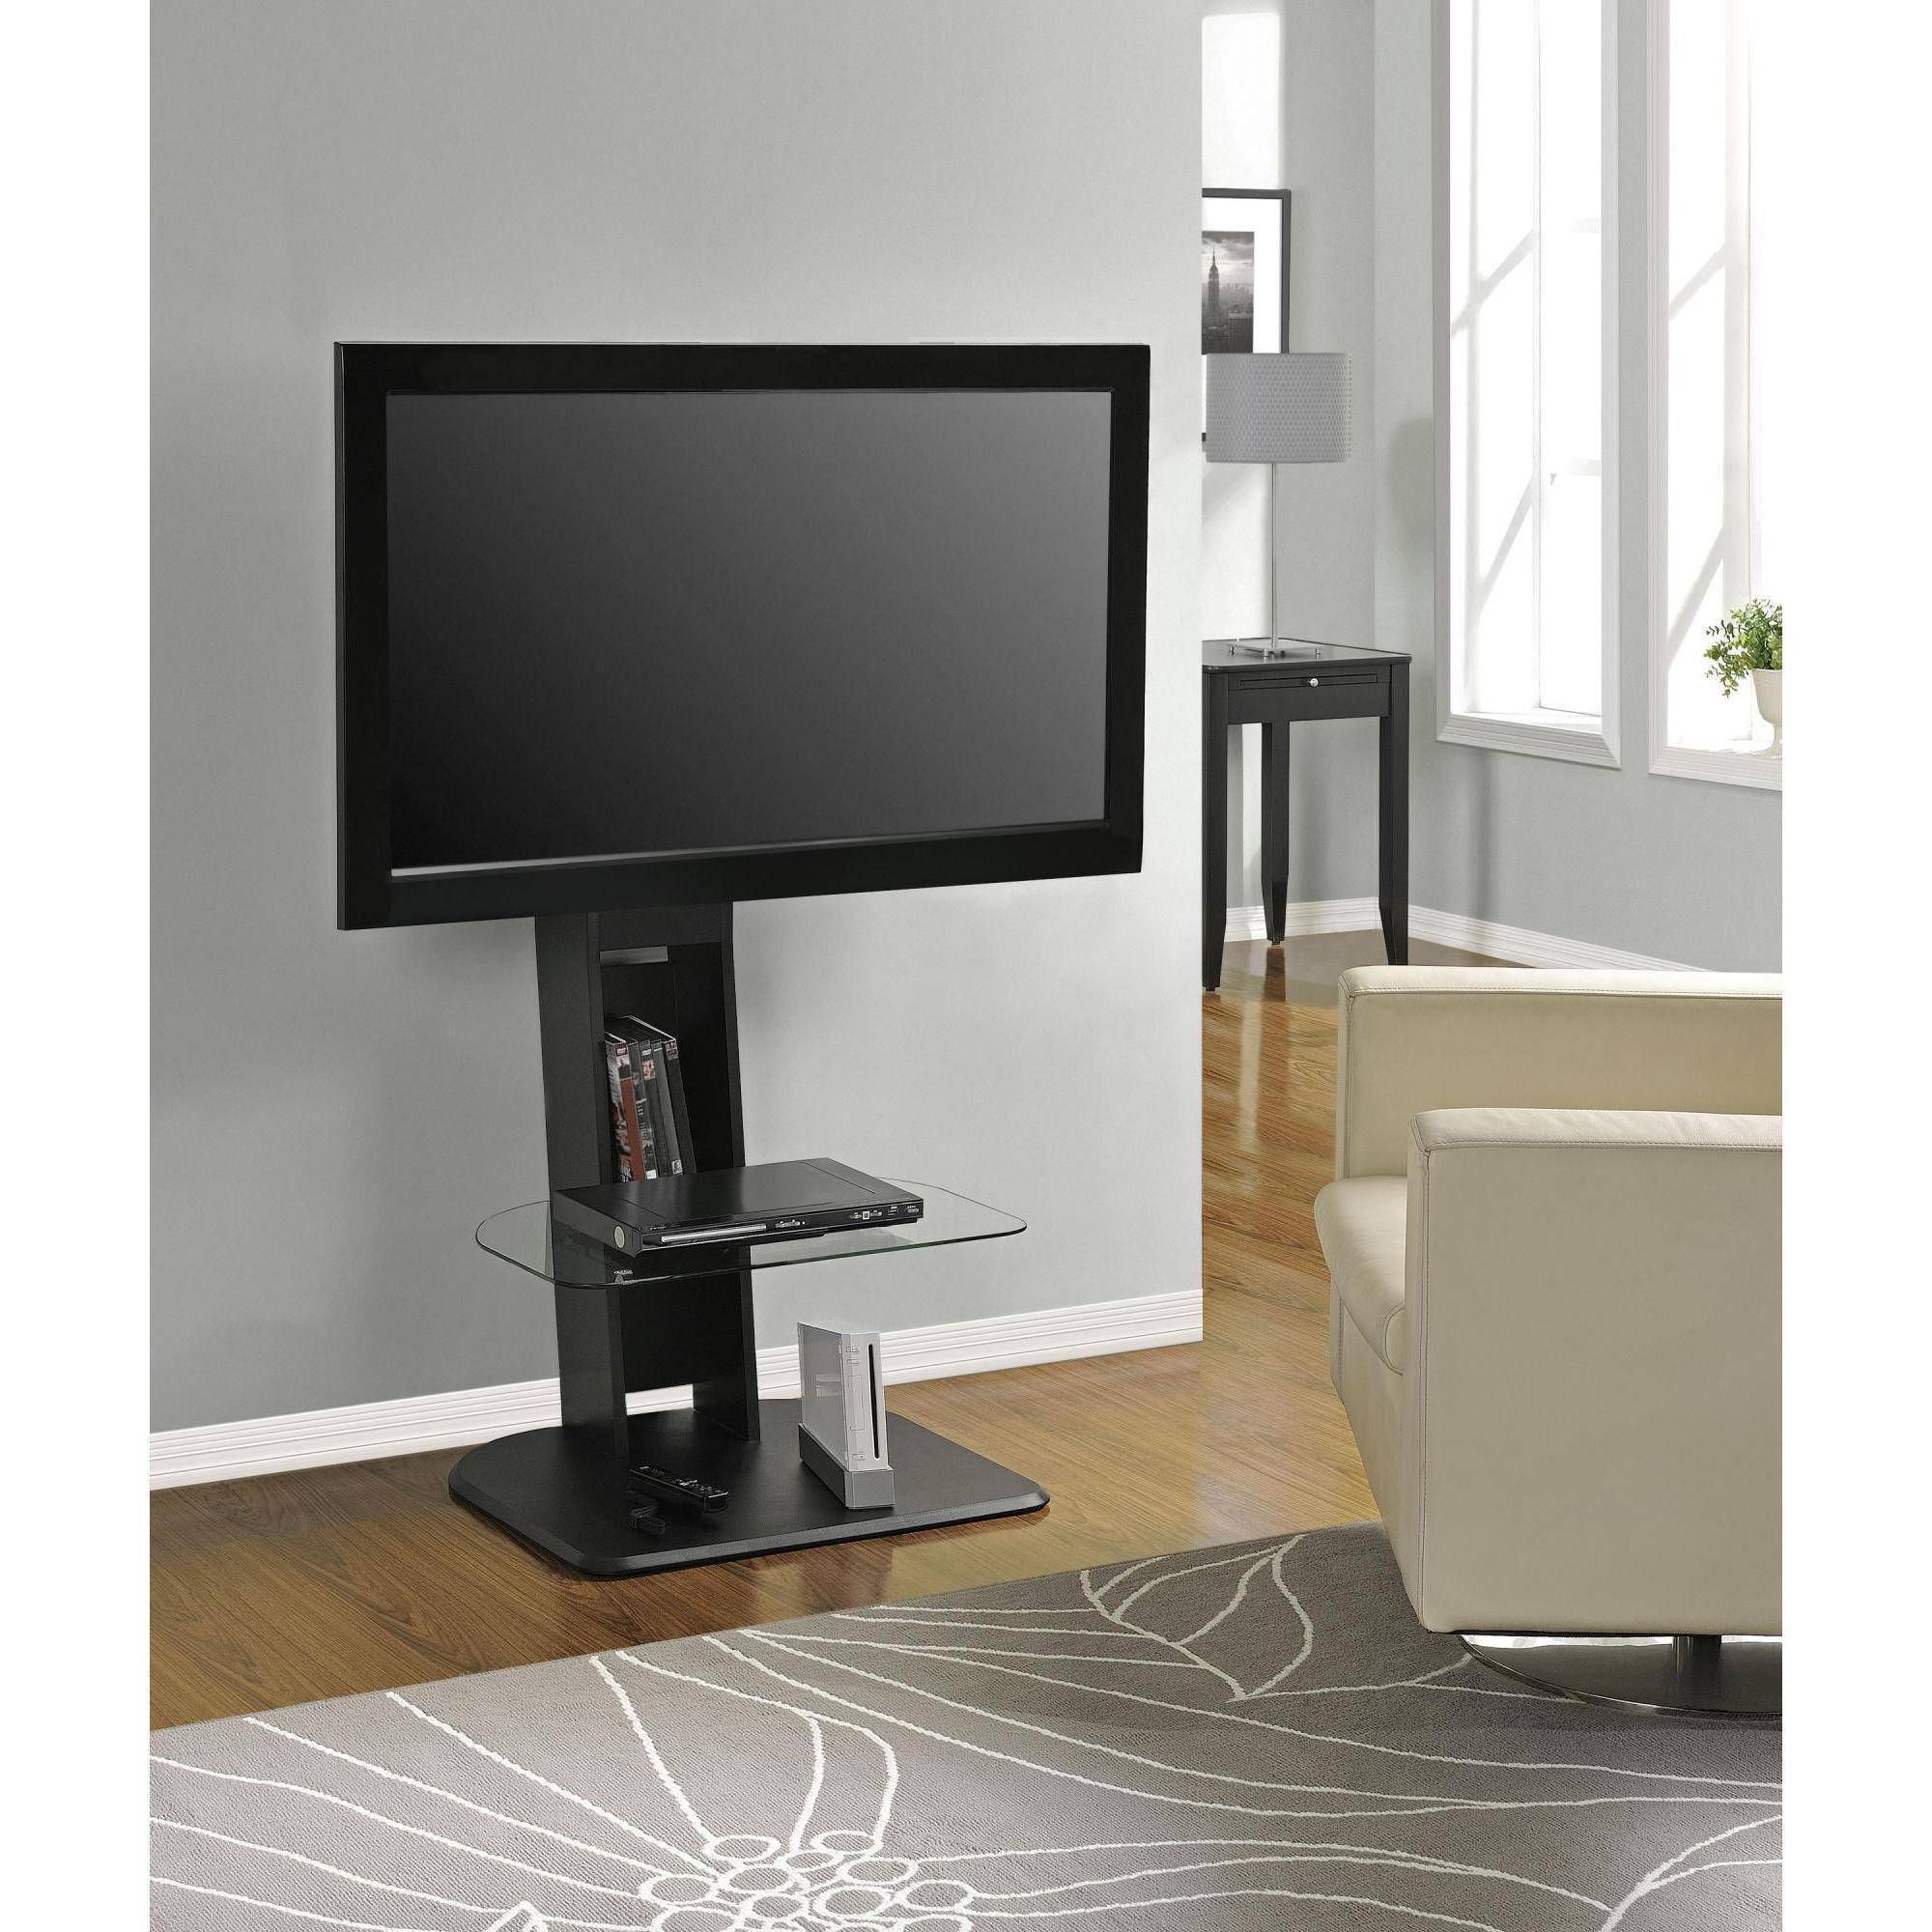 Atlantic Furniture Tabletop Tv Stand, Black – Walmart Regarding Tv Stand With Mount (View 1 of 15)